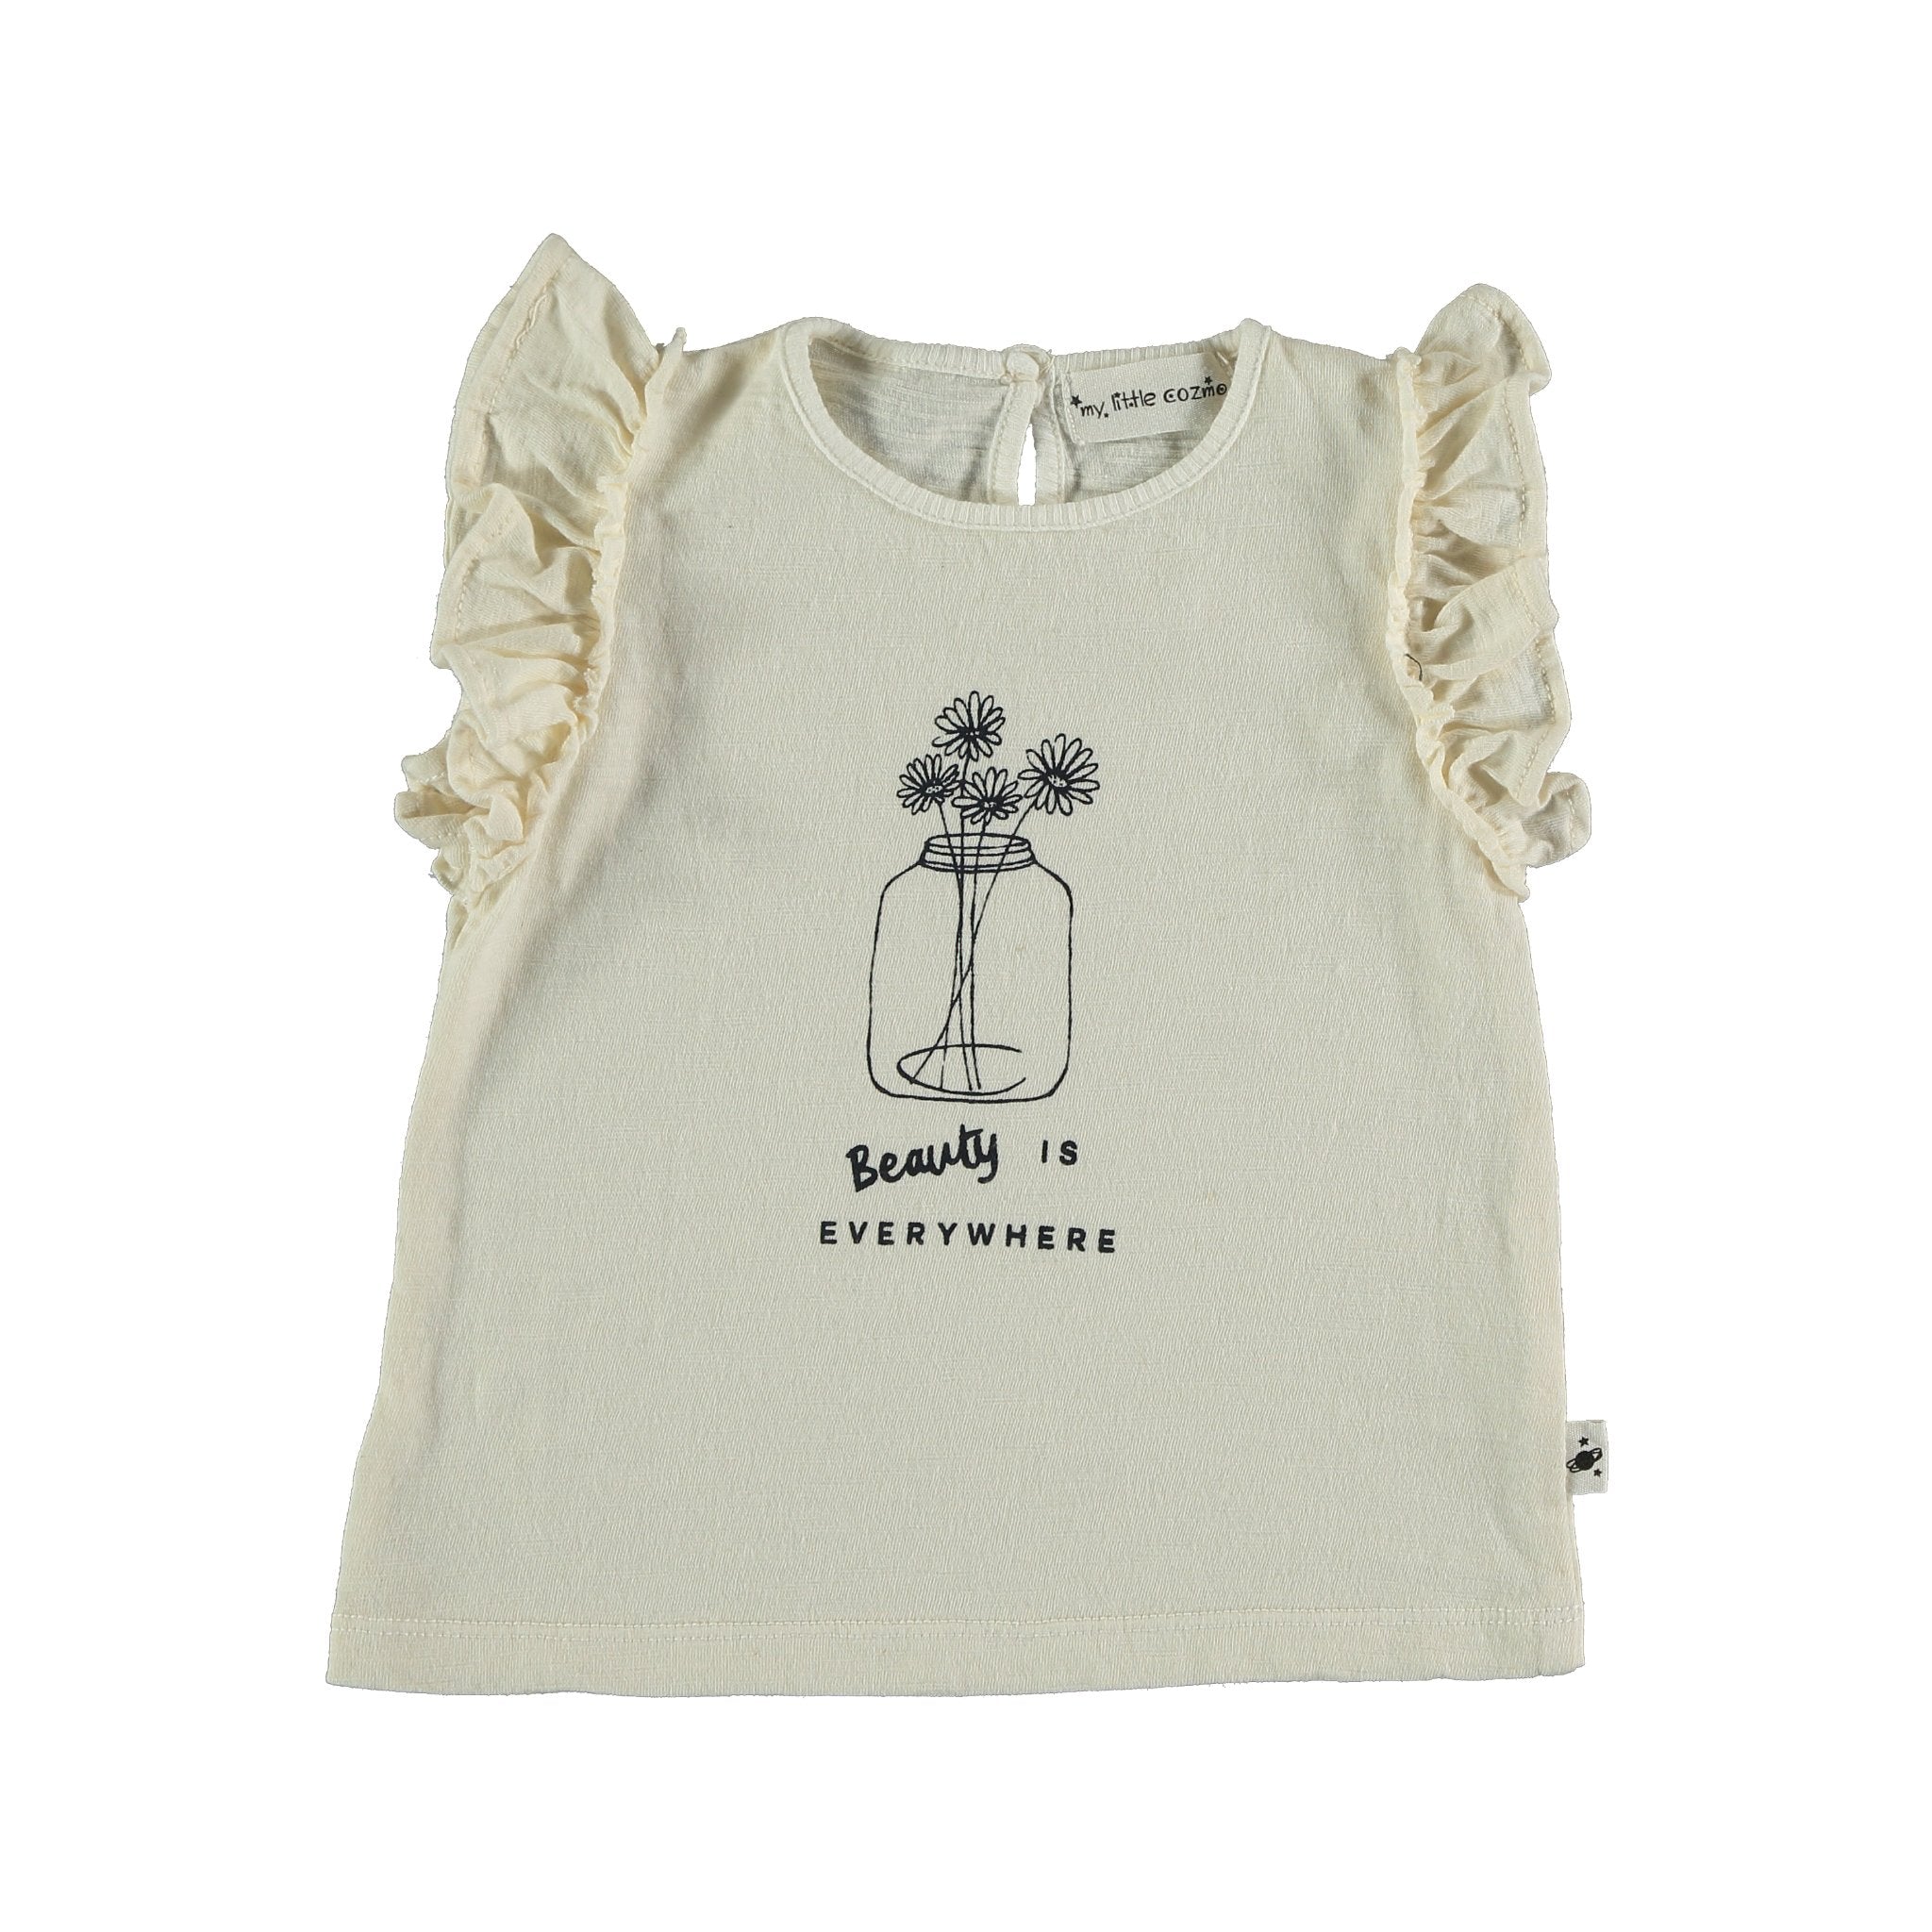 My Little Cozmo flame ruffled baby t-shirt ivory